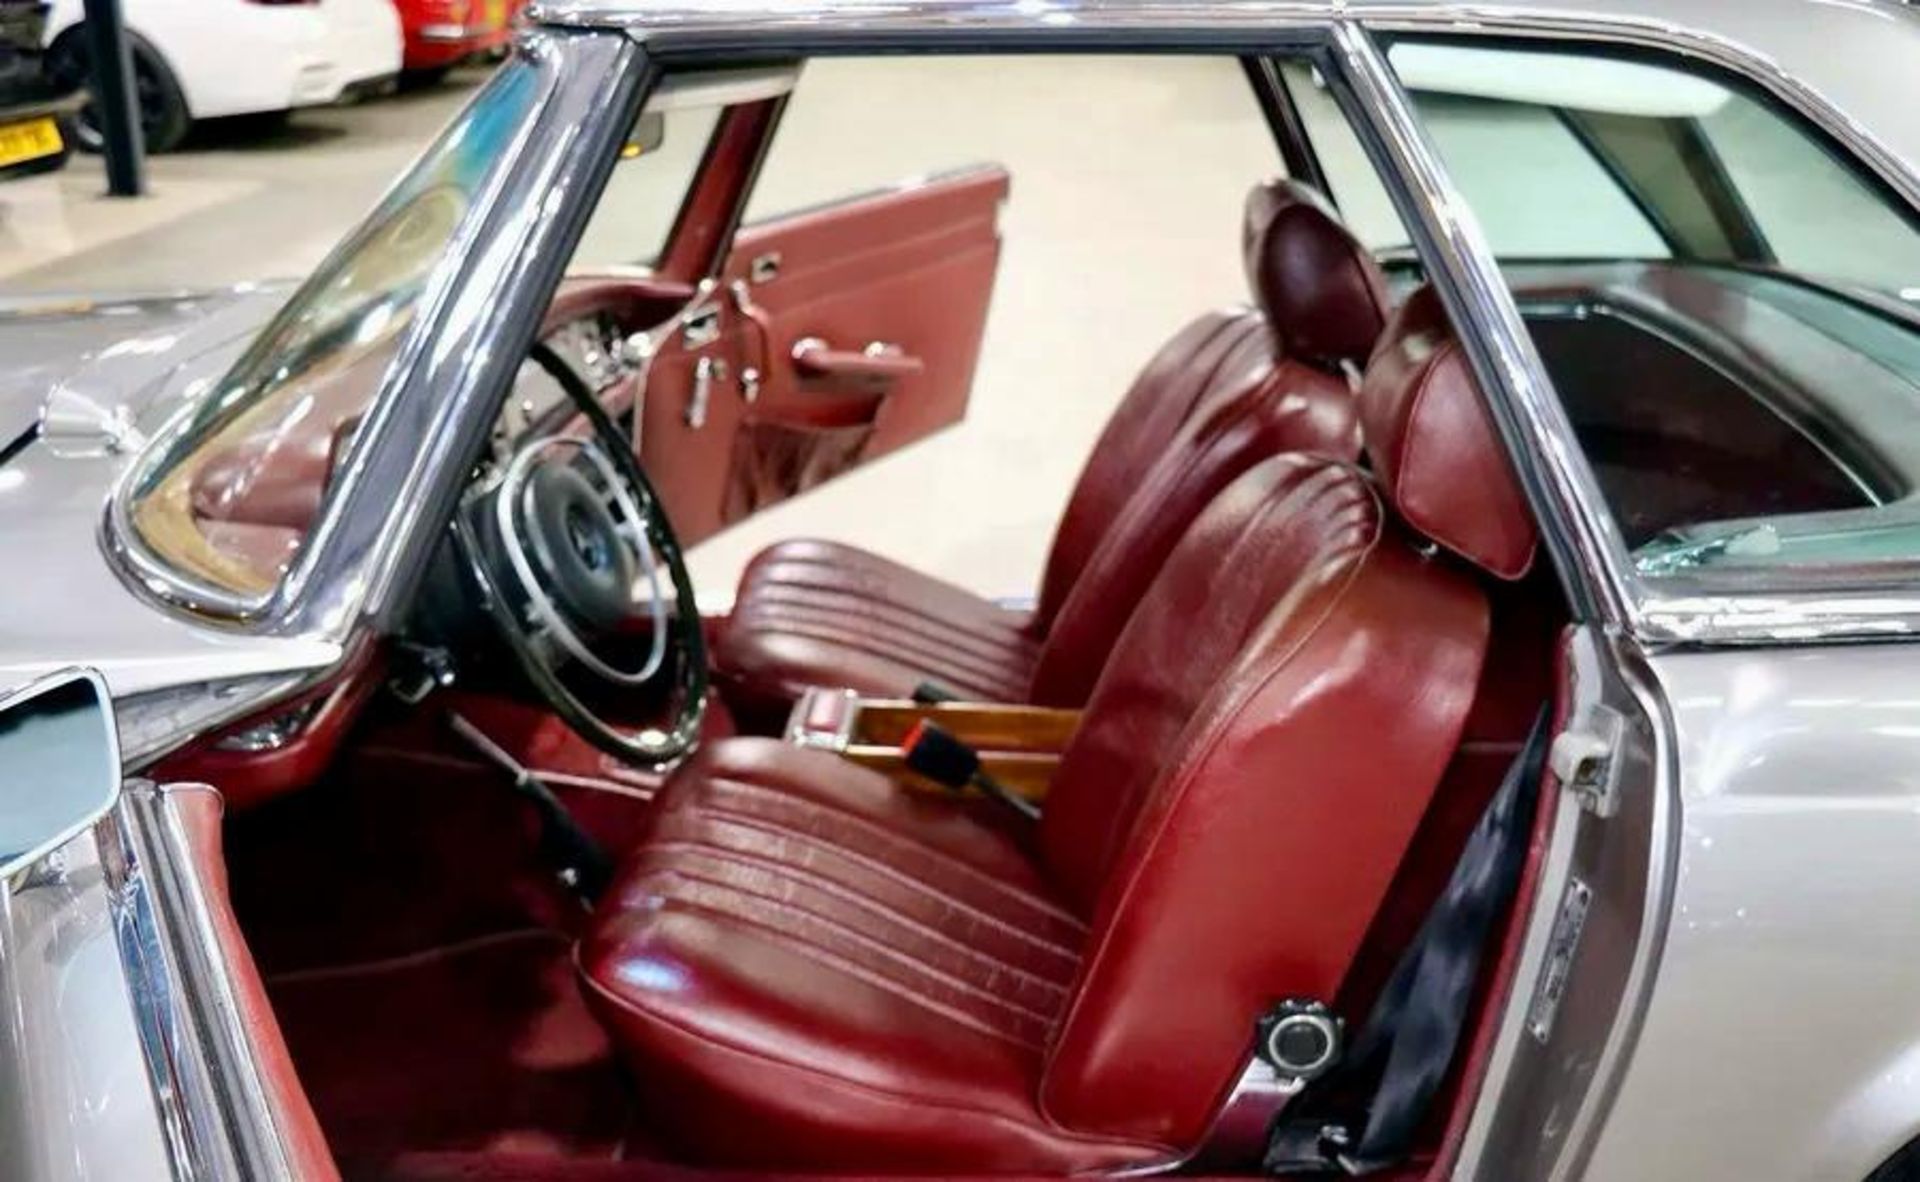 1969 MERCEDES-BENZ 280 SL, LHD MADE IN GERMANY, REGISTERED AND RESTORED IN DUBAI, CAR NOW IN THE UK - Image 7 of 15